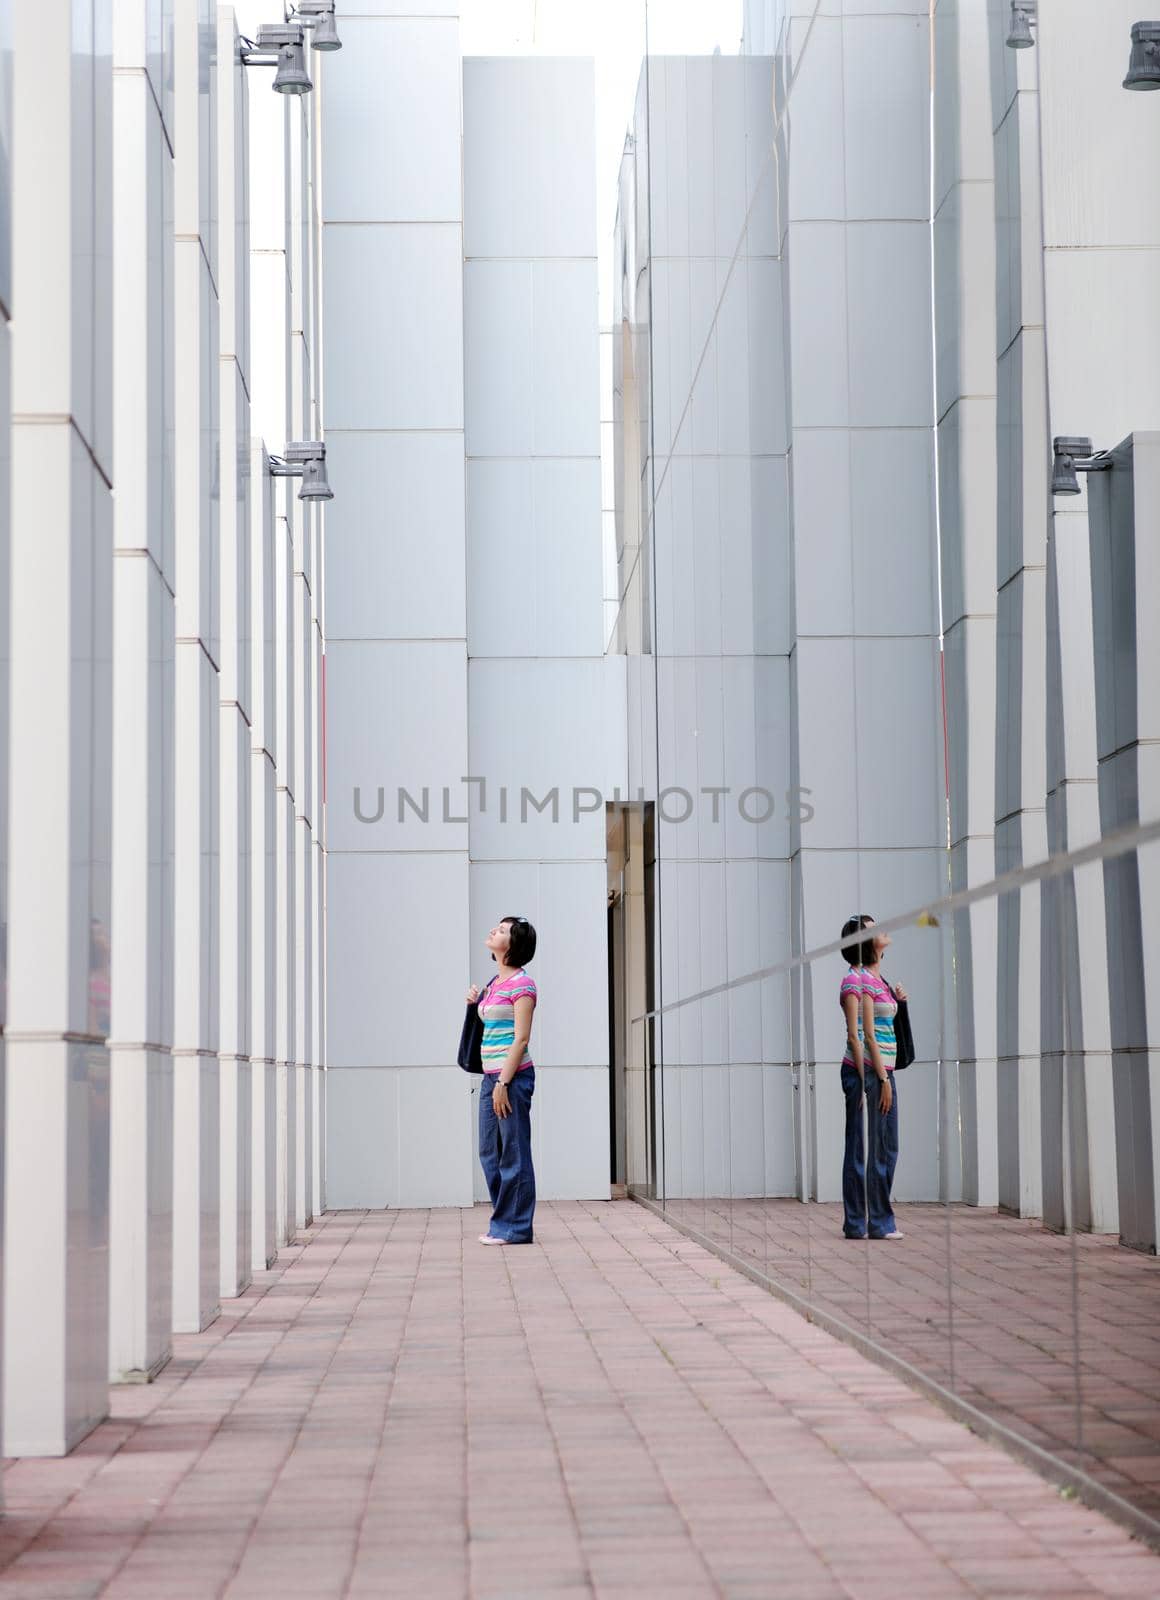 Beautiful woman  outdoor modern city urban street scene with abstract  glass reflections